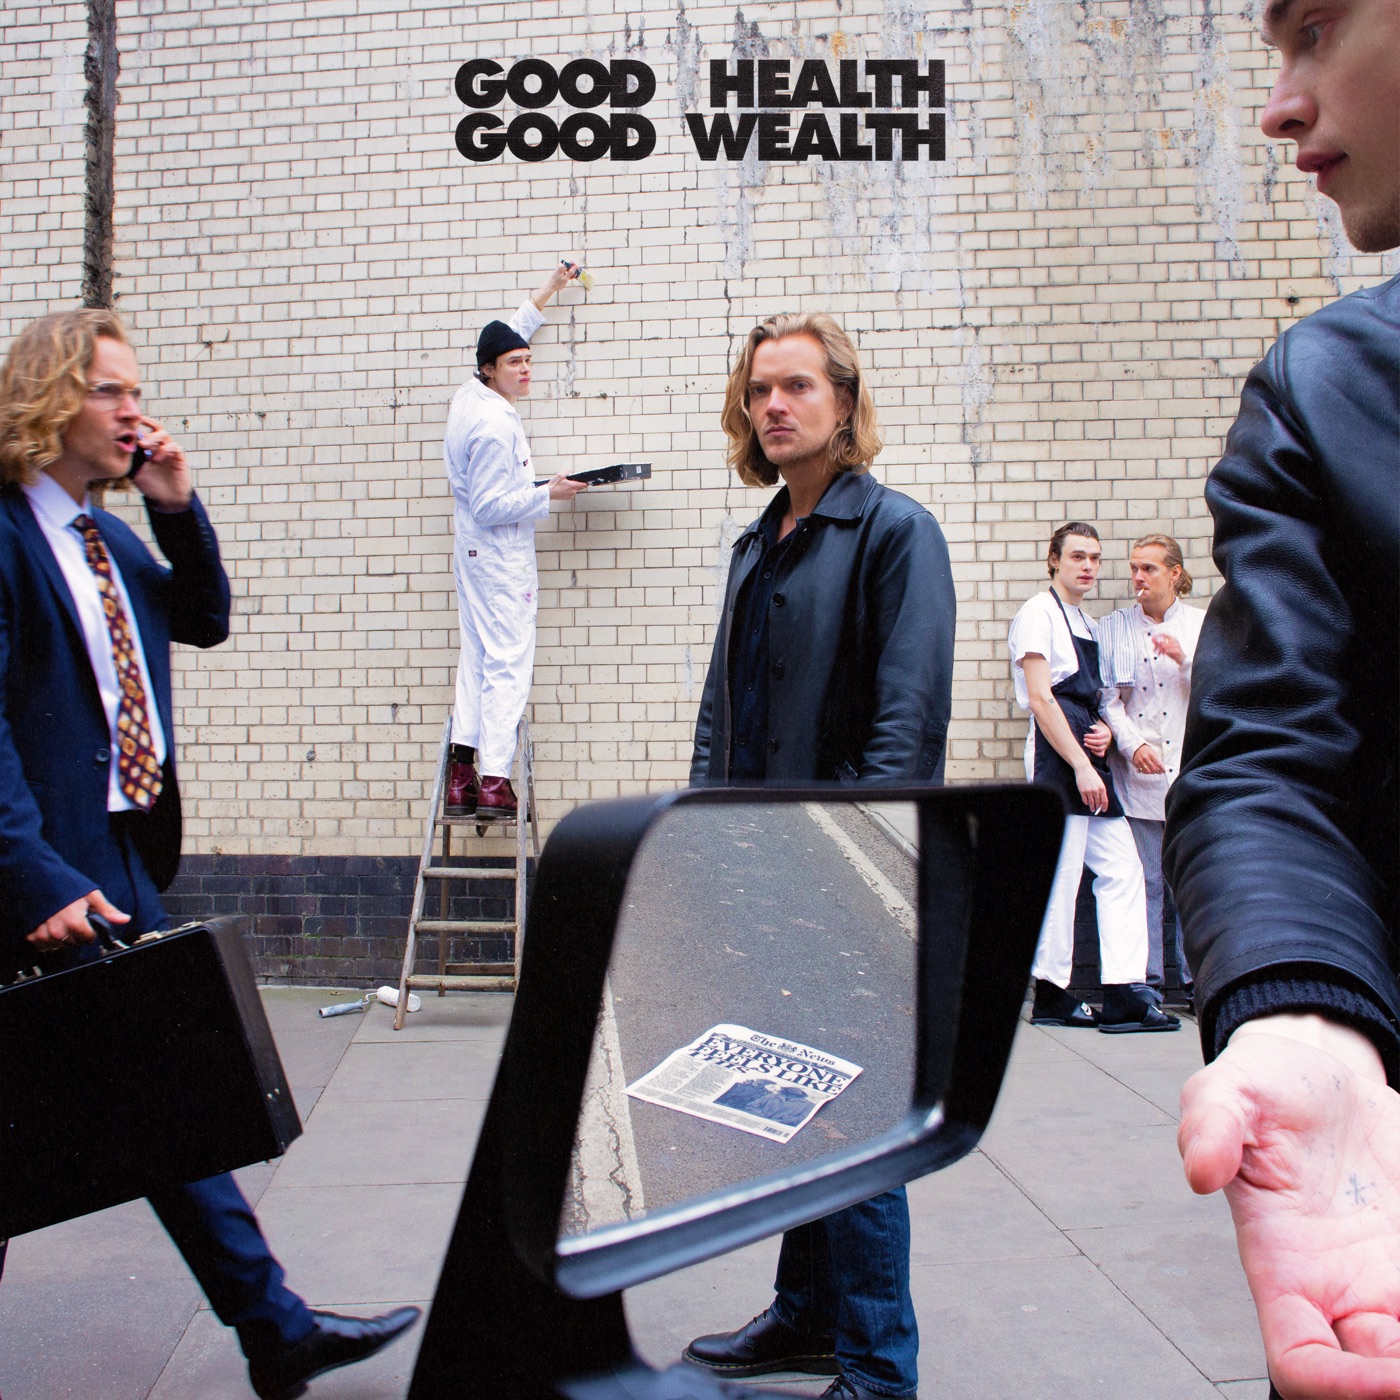 Everyone Feels Like This by Good Health Good Wealth